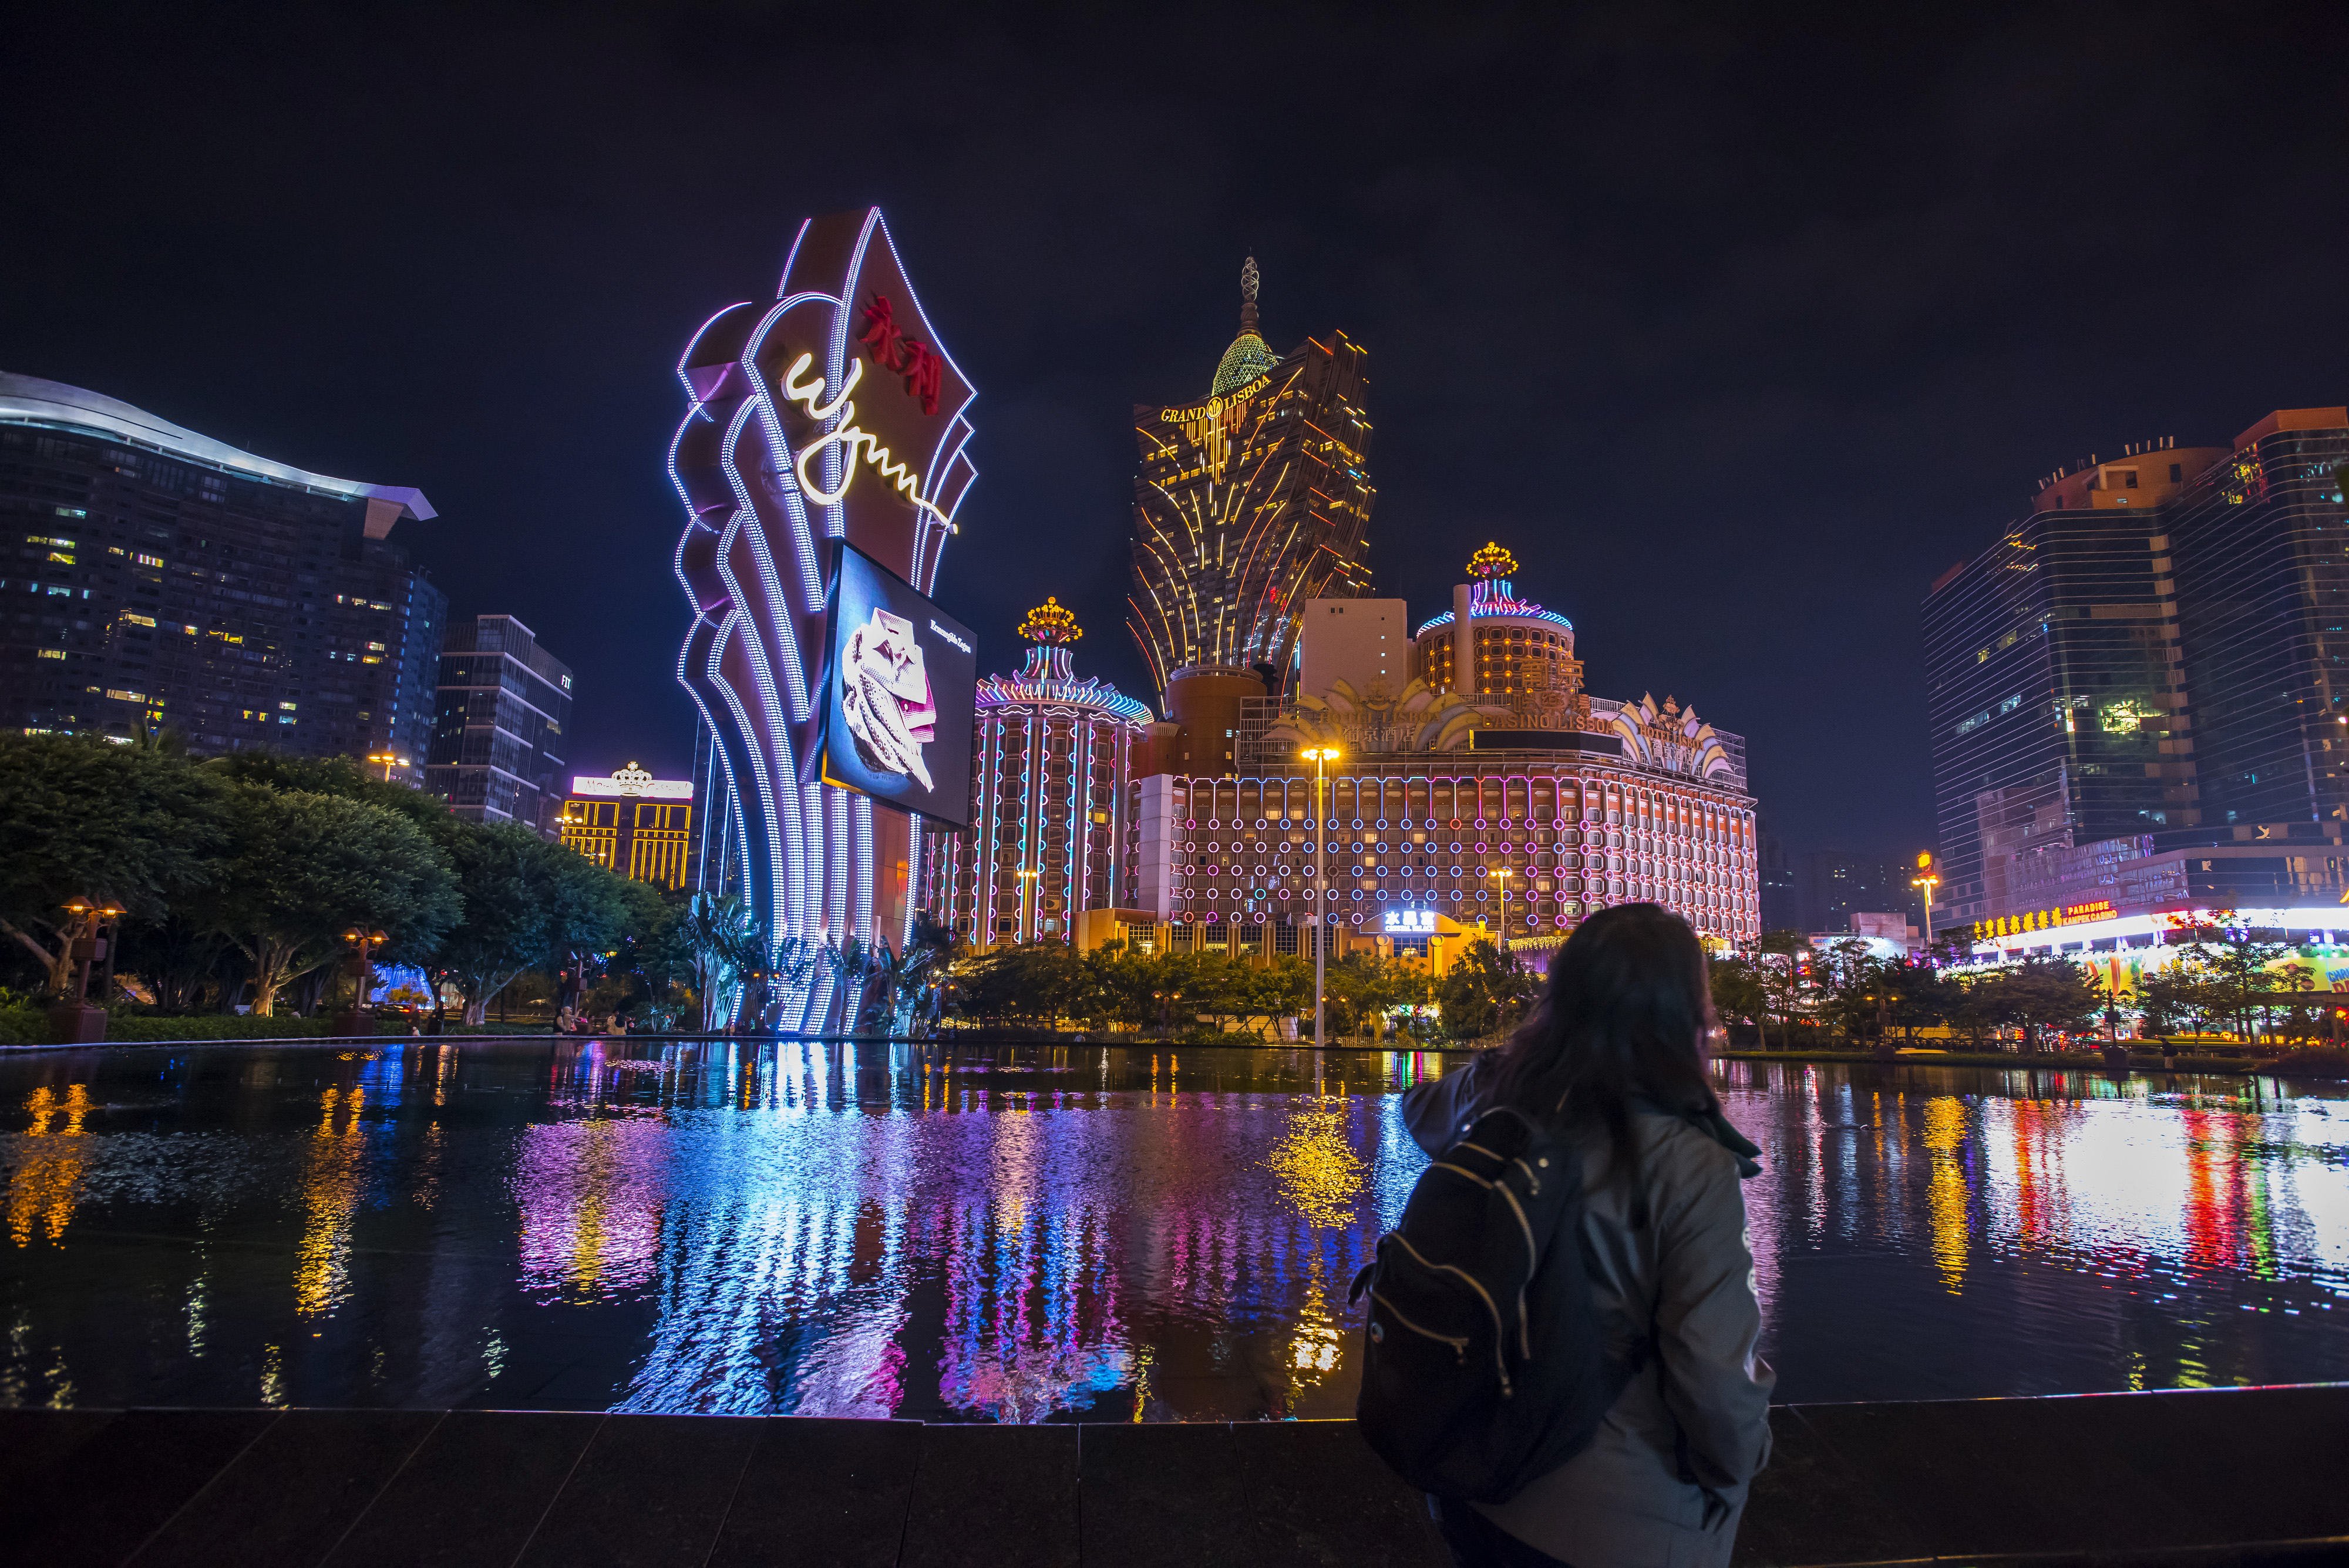 A pedestrian walks past signage for the Wynn Macau casino resort, operated by Wynn Resorts, front, as the Casino Grand Lisboa, center, stands illuminated at night in Macau on Dec. 6, 2015. Casino operators in the Chinese gambling hub of Macau saw a 32% slump in revenue in November from a year earlier and it's fallen for 18 straight months, data from the city show (Bloomberg/Getty Images)